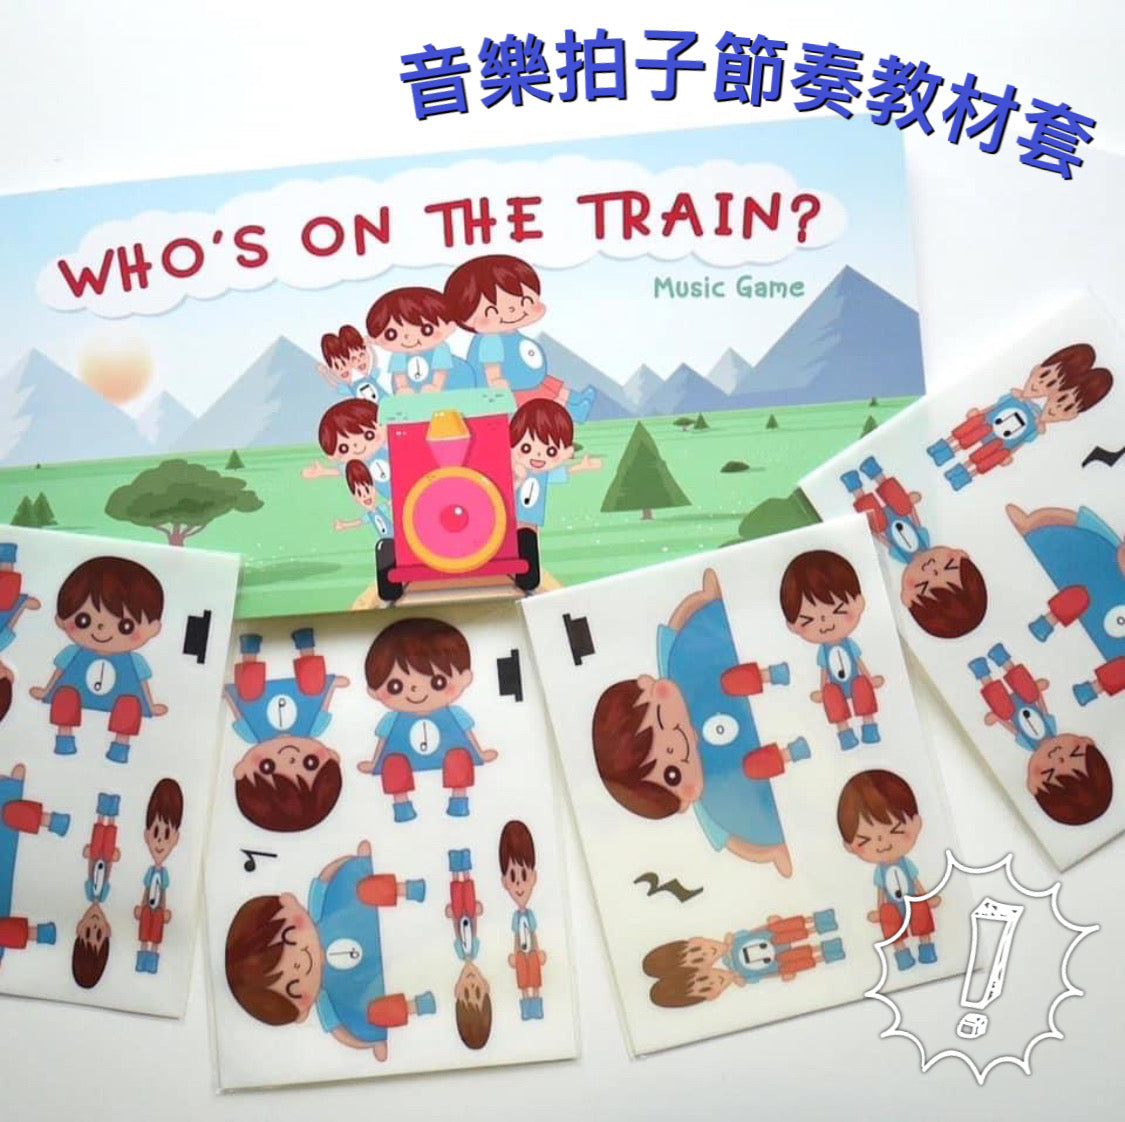 Who’s on the train? Rhythm Music Game